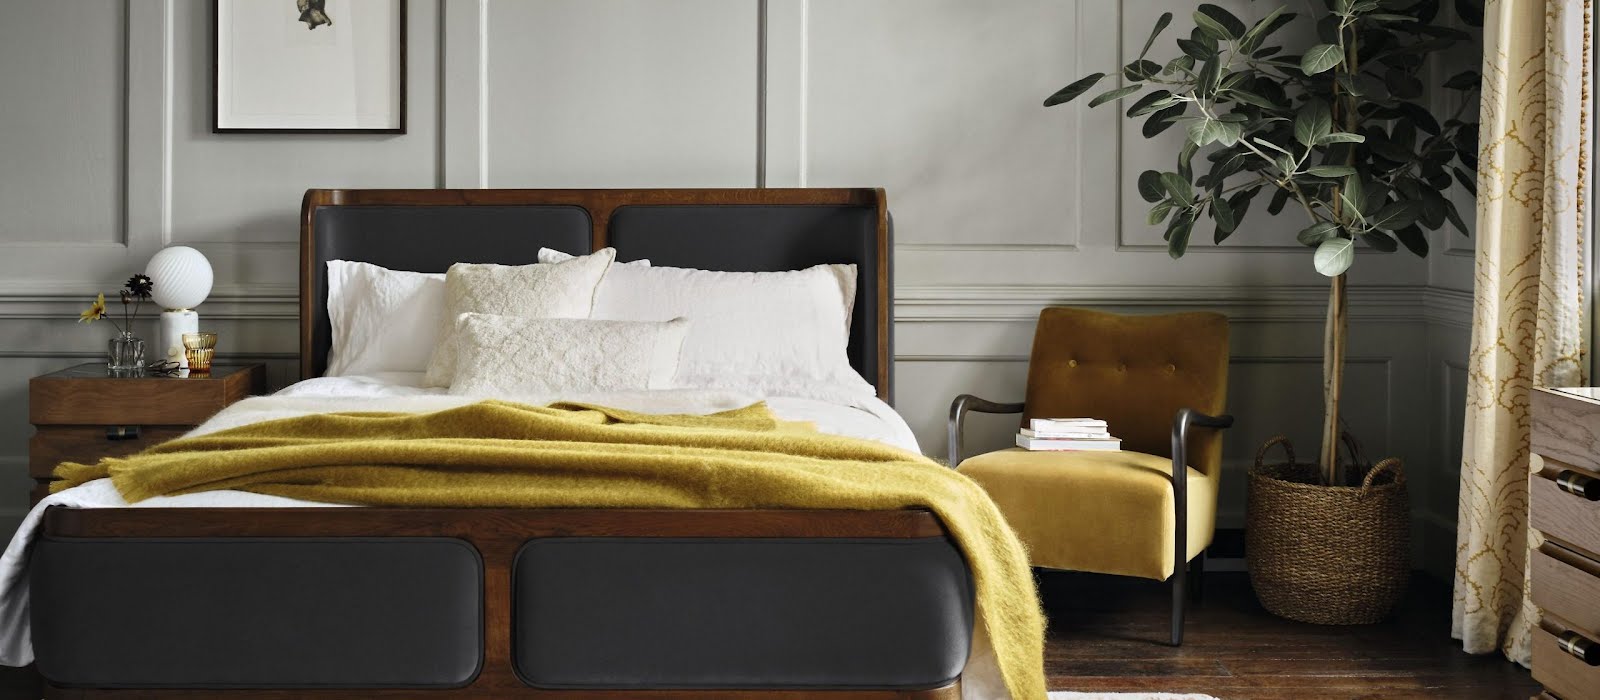 12 bedroom accessories to create a sleep space you actually want to spend time in (for less than €50)